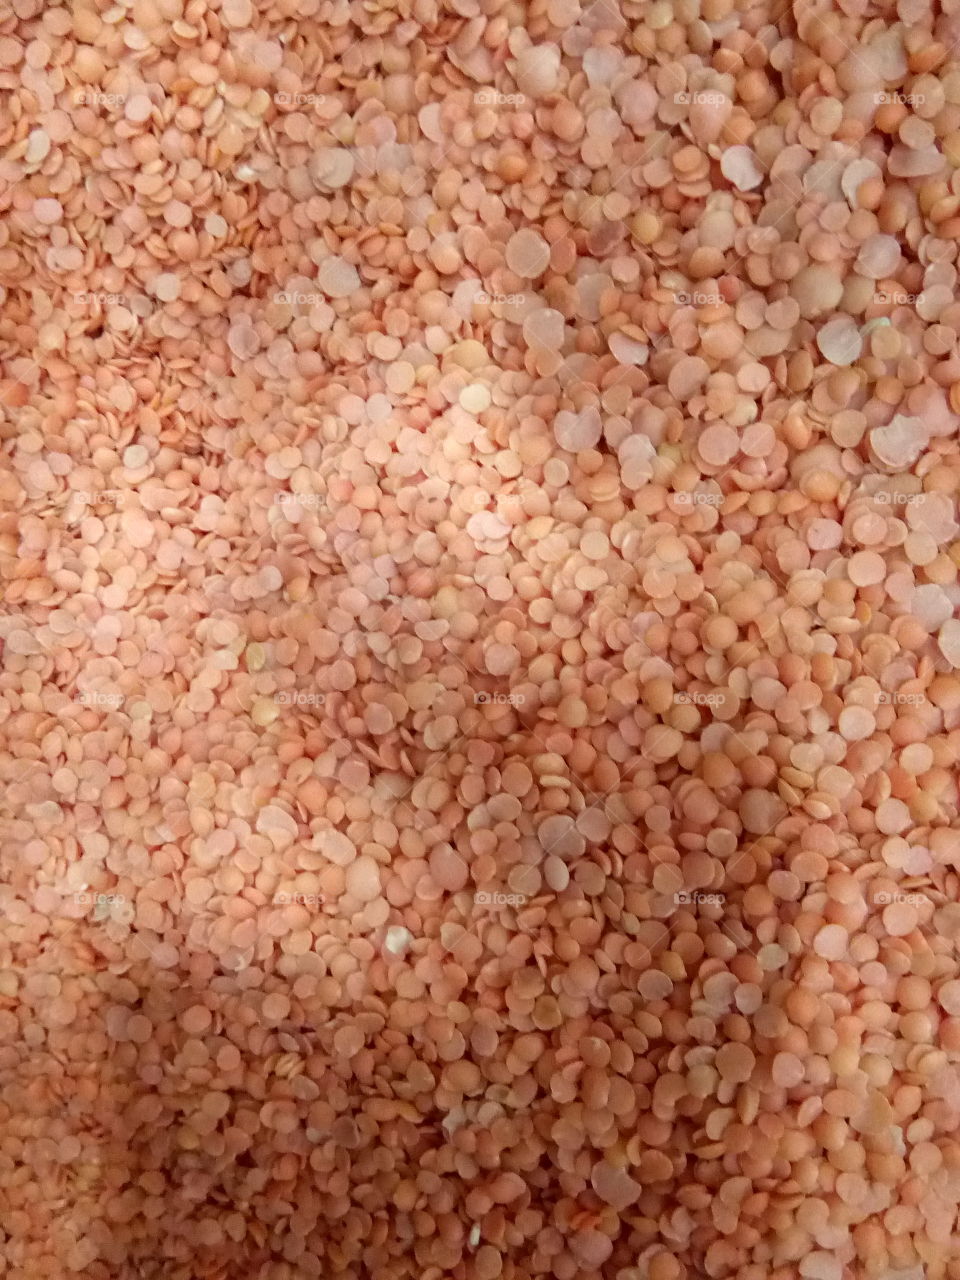 very very tasty lentils. you see it in every kitchen.